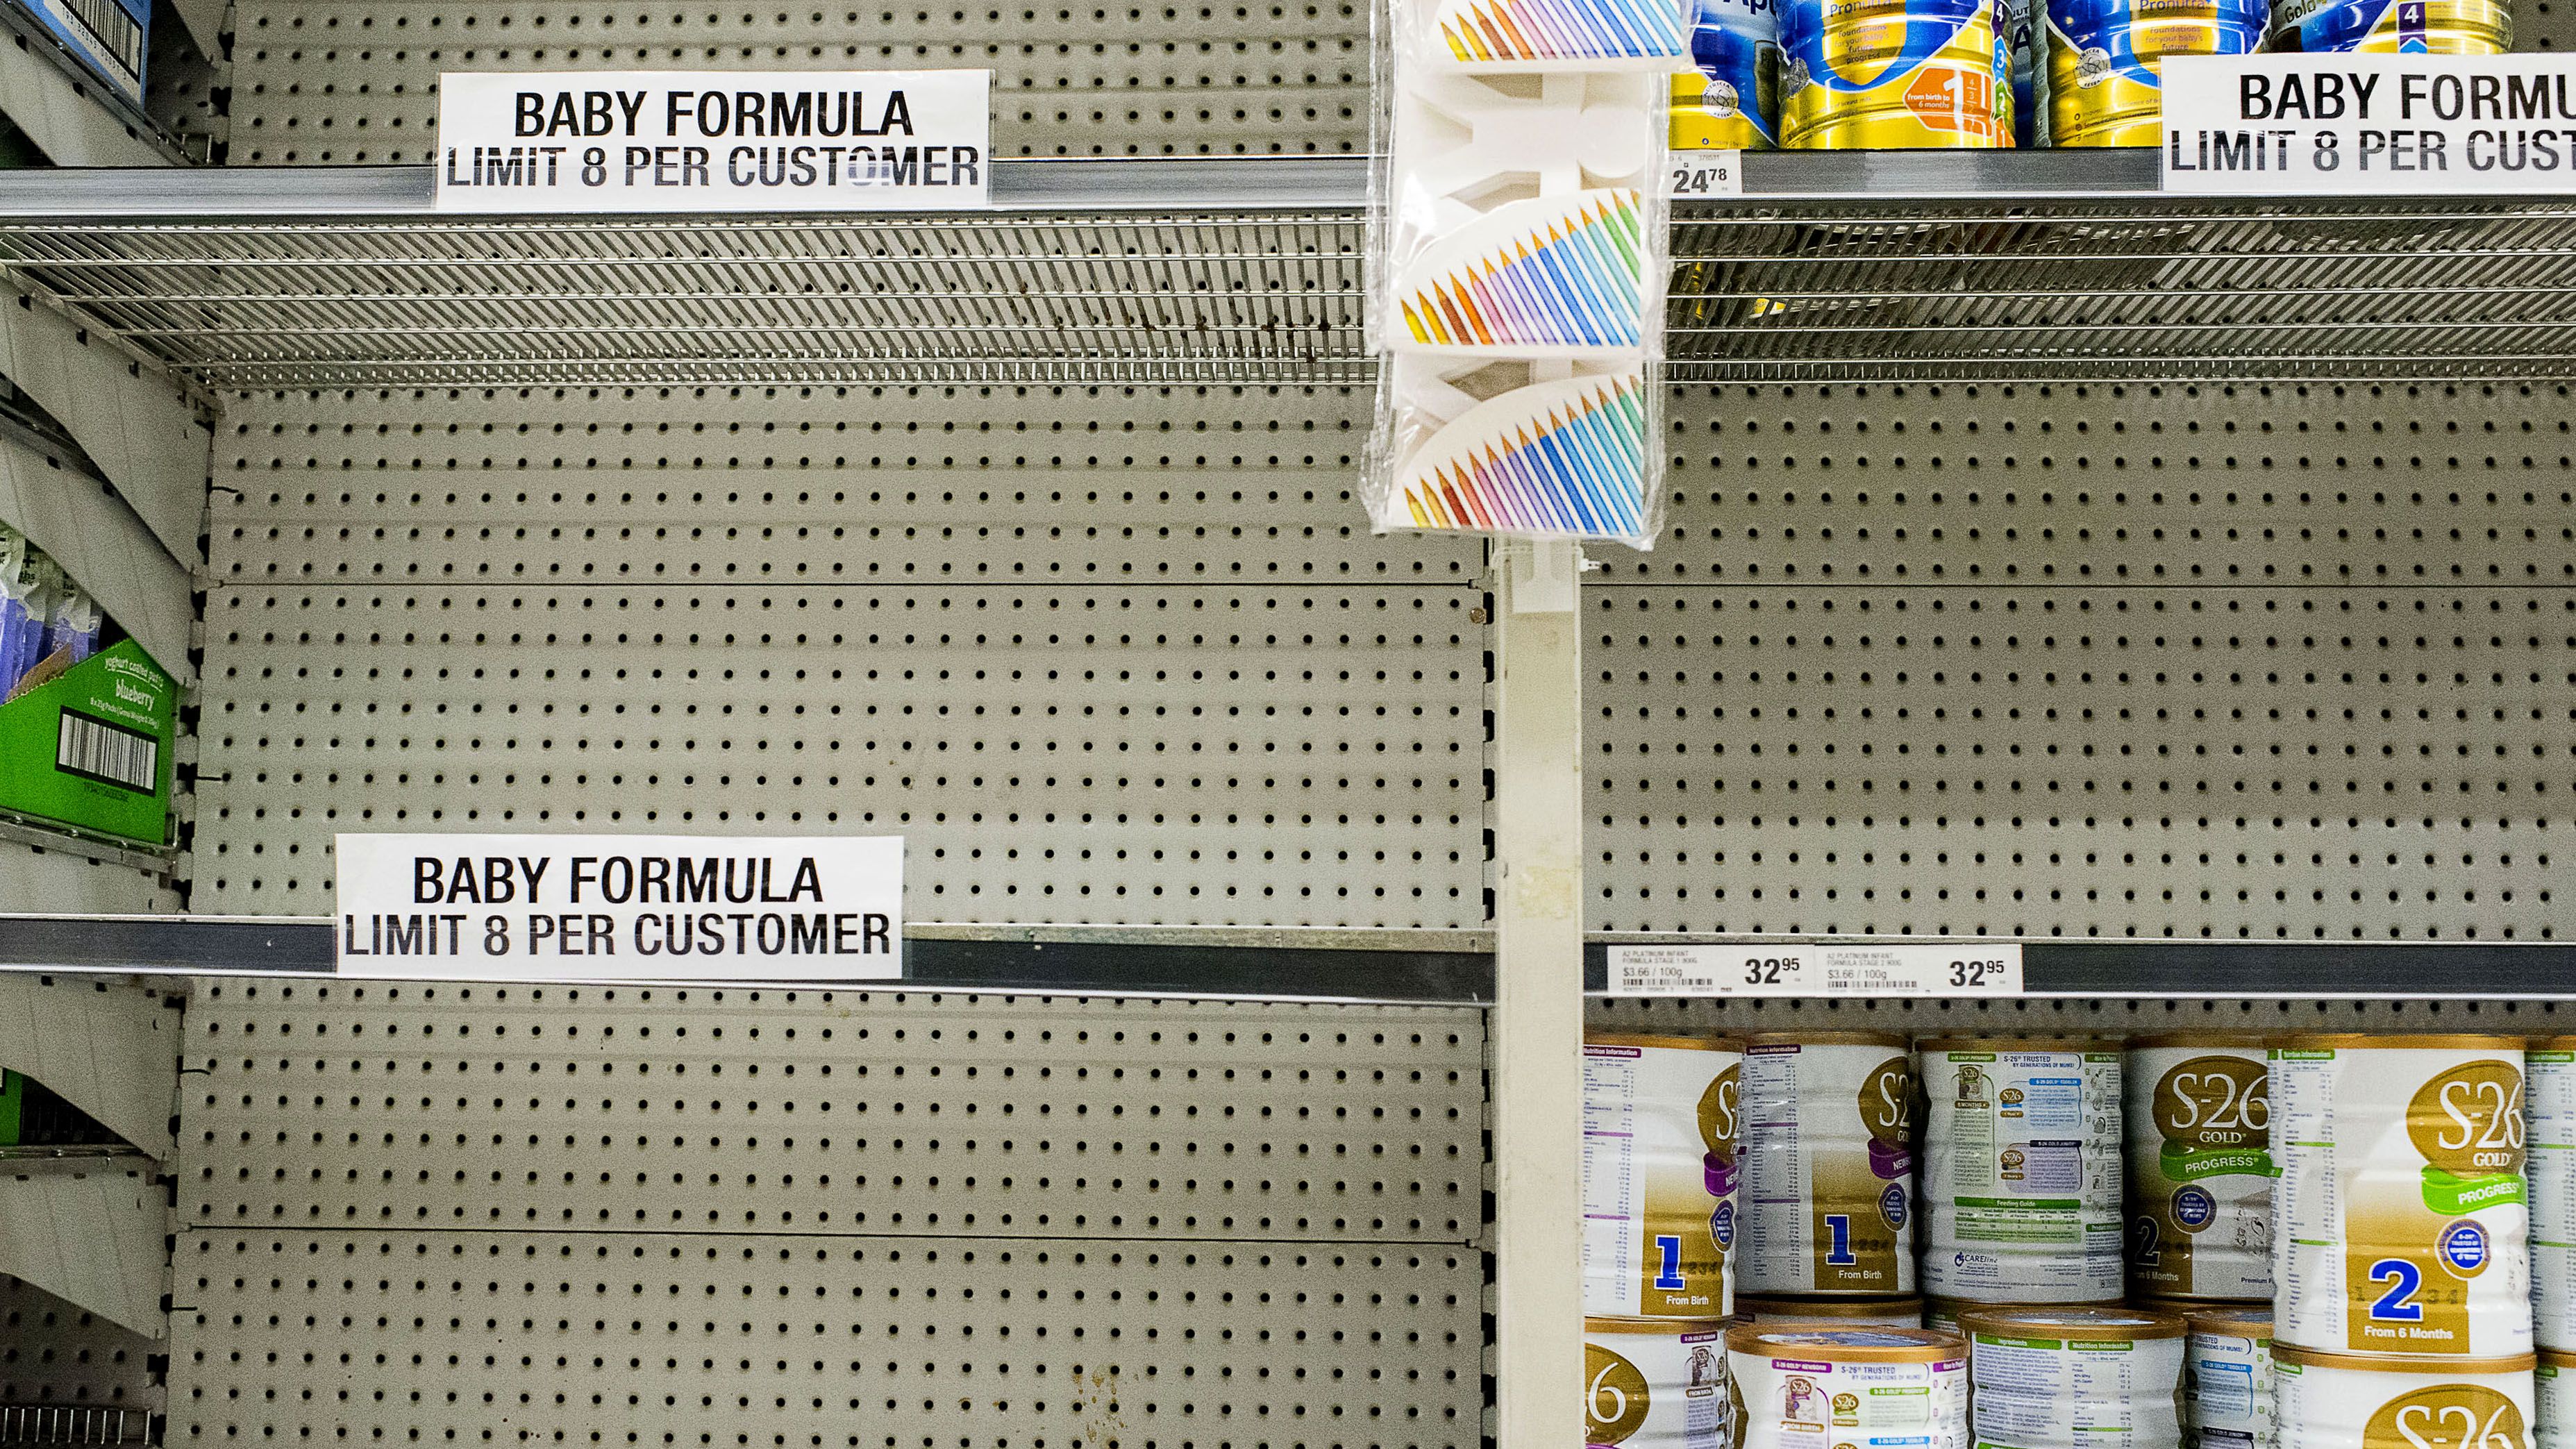 https://hips.hearstapps.com/hmg-prod/images/shelves-almost-empty-of-baby-formula-with-signs-warning-news-photo-1652378627.jpg?crop=1xw:0.8425xh;center,top